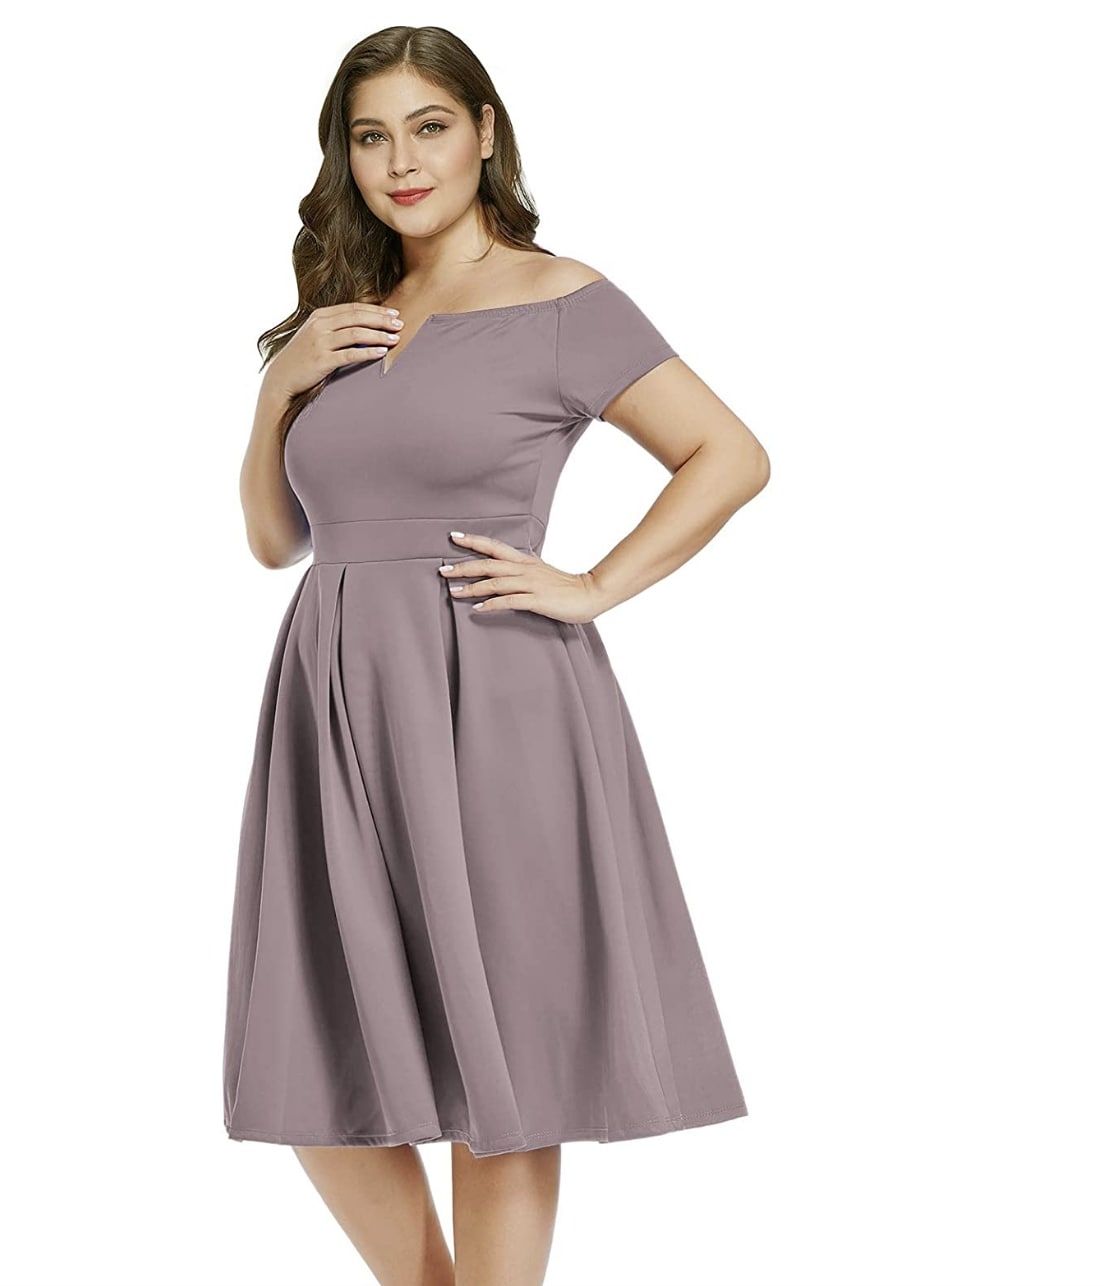 Style B07BPXV9LM Lalagen Plus Size 20 Bridesmaid Purple Cocktail Dress on Queenly